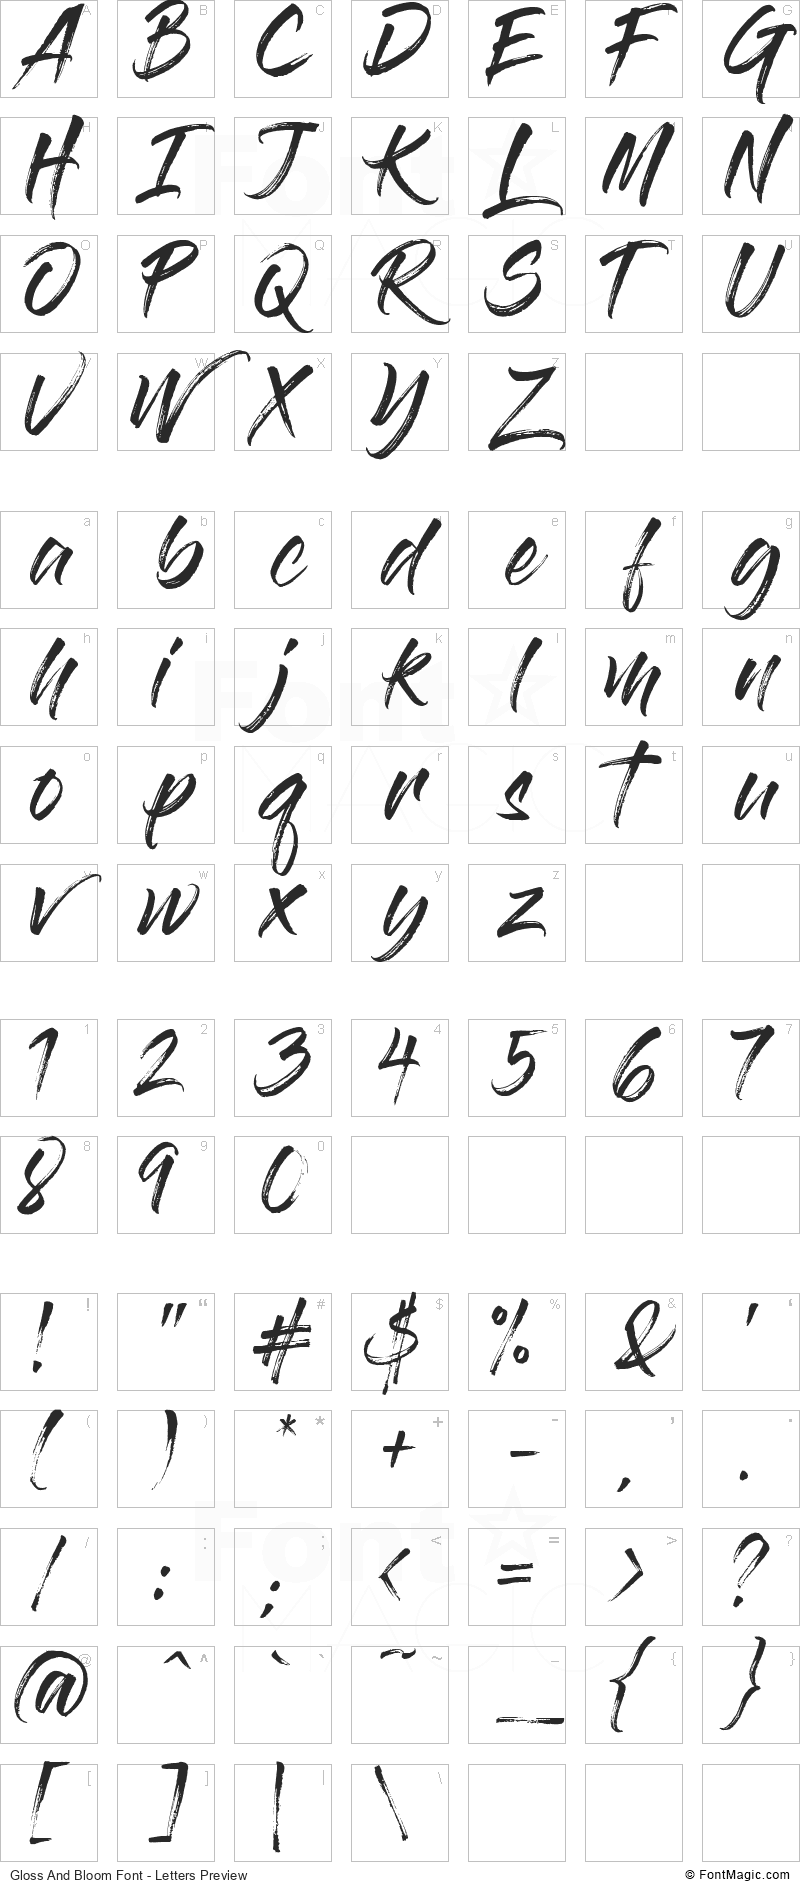 Gloss And Bloom Font - All Latters Preview Chart